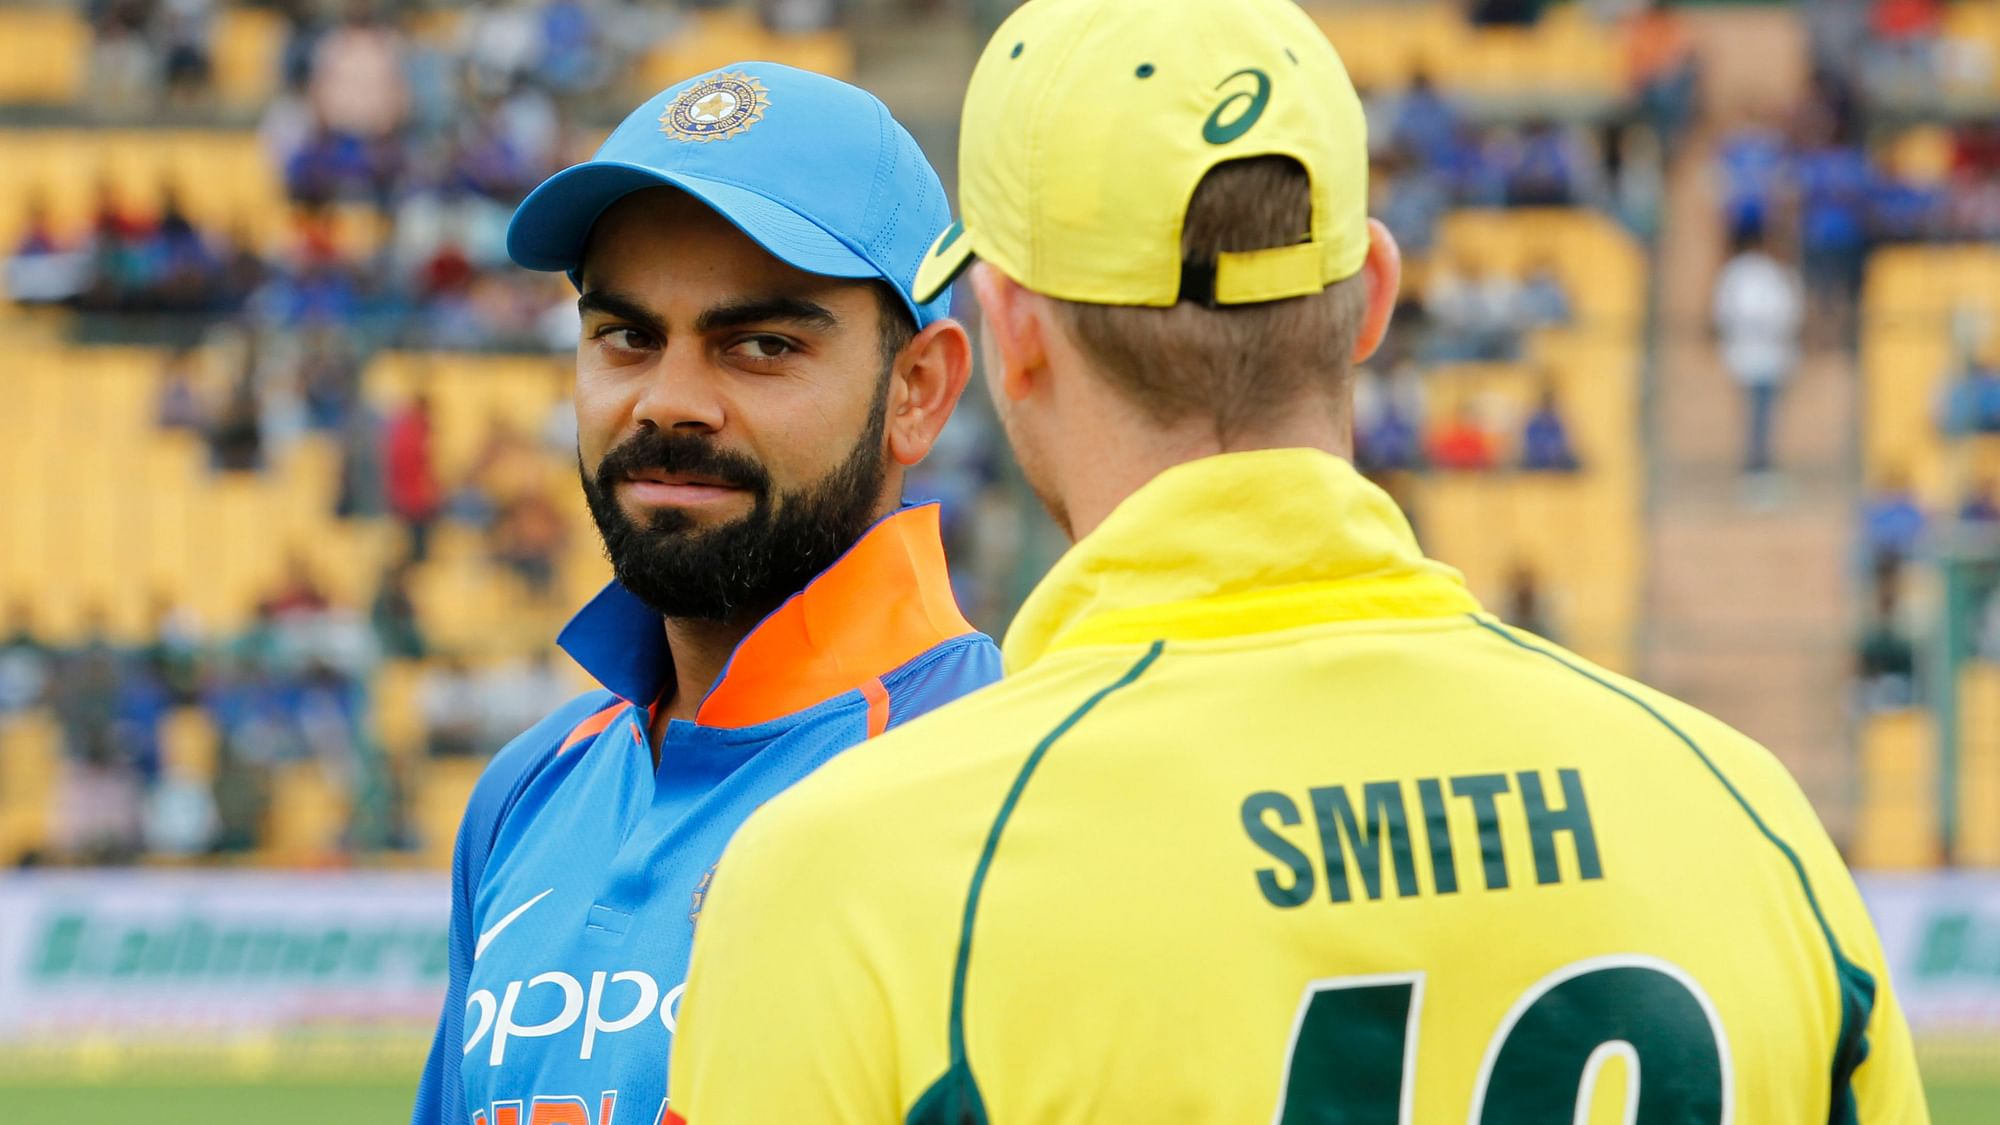 Steve Smith thanked Virat Kohli for his gesture when he asked fans to stop booing him at the 2019 World Cup.